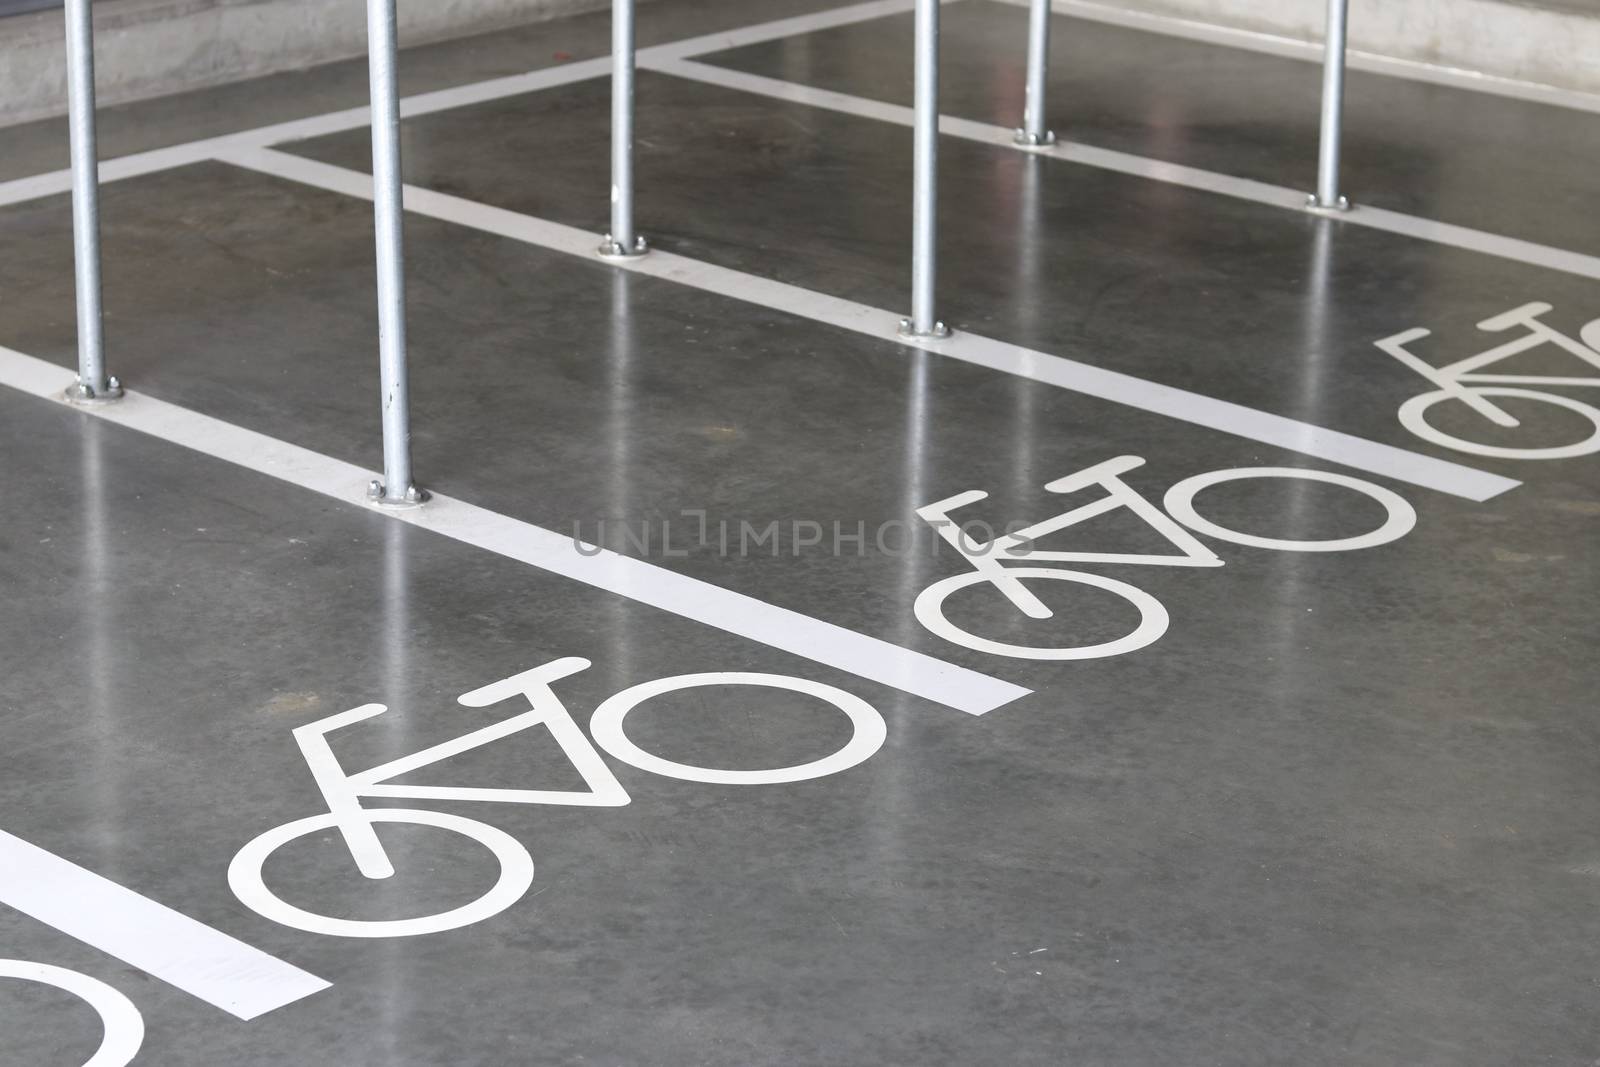 Symbol for bicycle parking. Parking for bicycles. Bicycle parking lot.